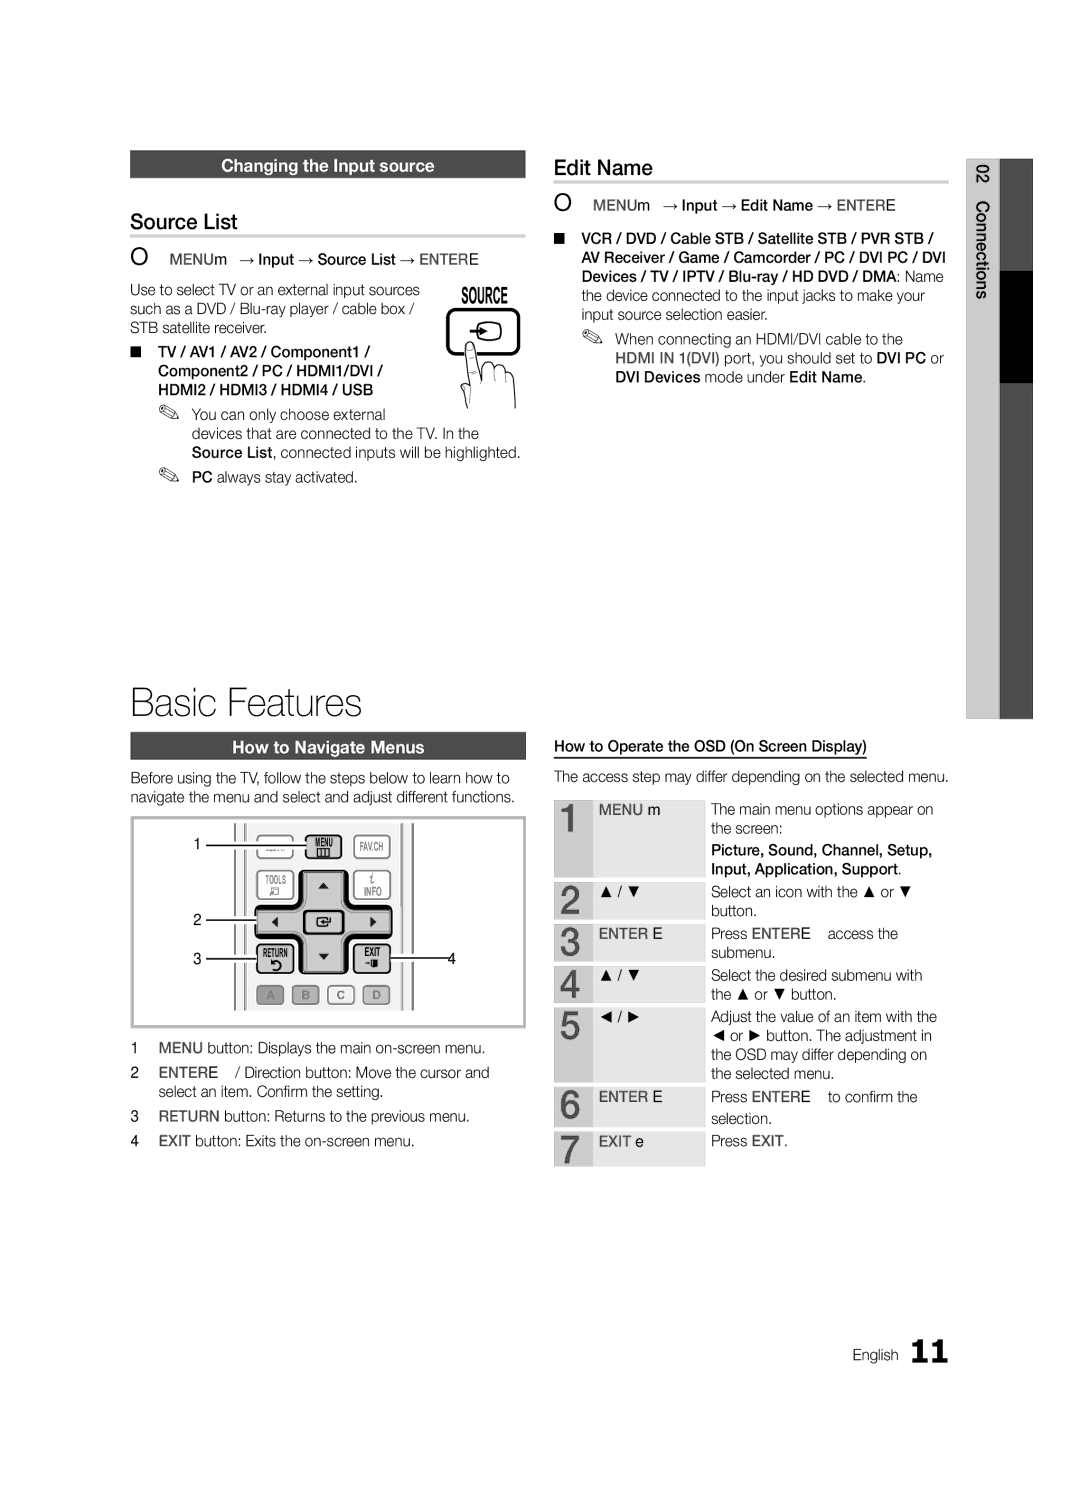 Samsung LN32C540 user manual Basic Features, Source List, Edit Name, Changing the Input source, How to Navigate Menus 